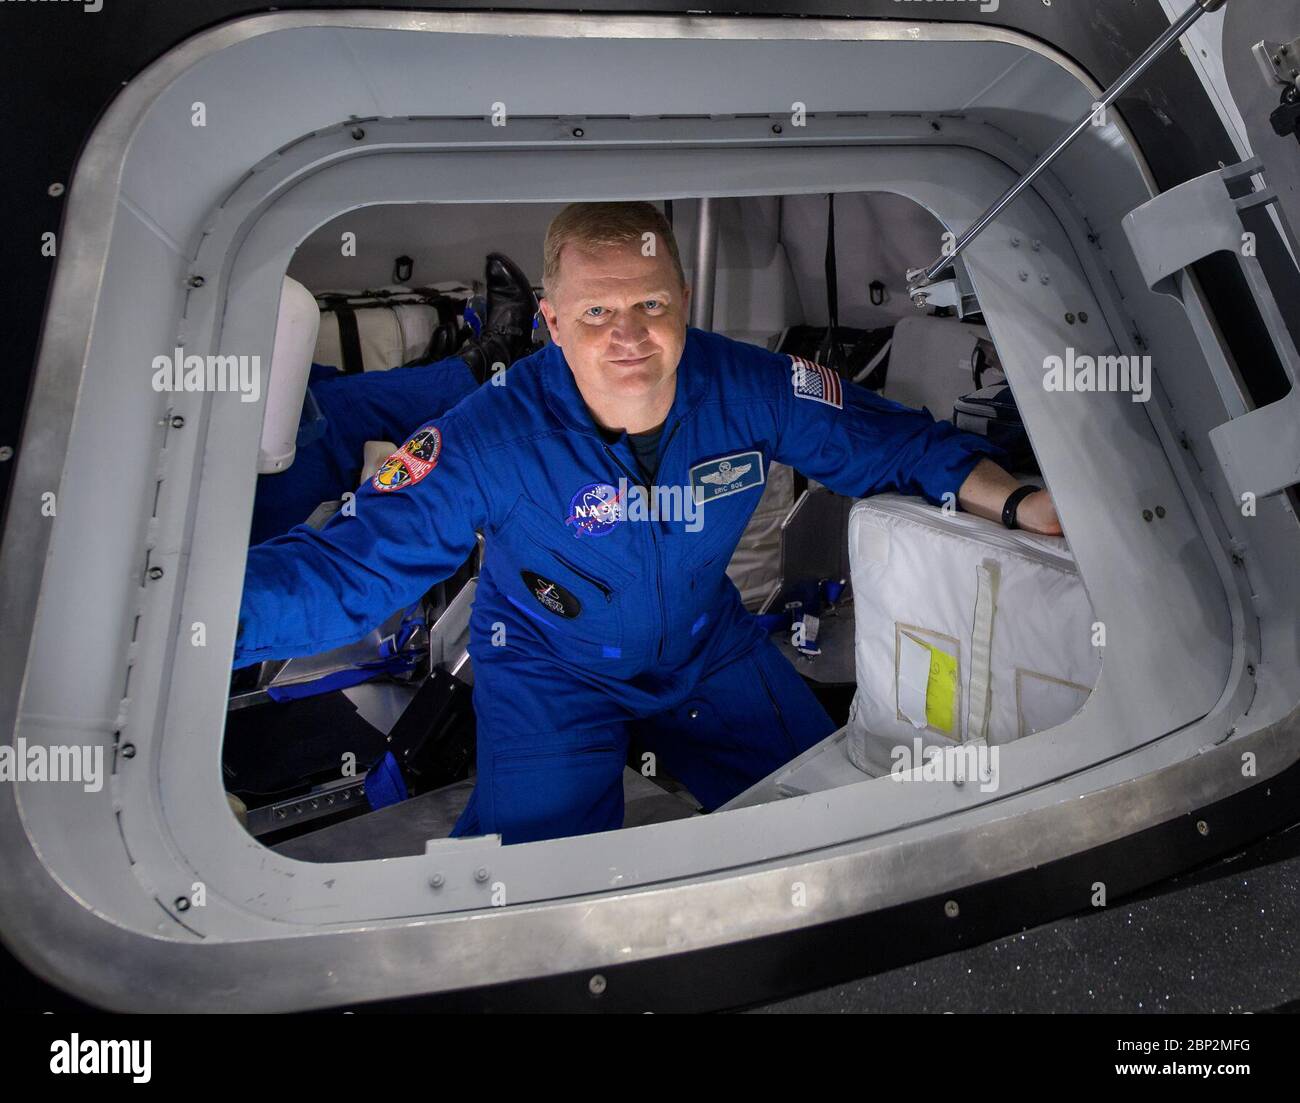 Commercial Crew Program  NASA astronaut Eric Boe poses for a photograph as he exits the Boeing Mockup Trainer at NASA’s Johnson Space Center in Houston, Texas on Aug. 2, 2018 ahead of the commercial crew flight assignments announcement Aug. 3. Boe, along with NASA astronaut Nicole Aunapu Mann and Boeing astronaut Chris Ferguson were assigned to launch aboard Boeing’s CST-100 Starliner on the company’s Crew Flight Test targeted for mid-2019 in partnership with NASA’s Commercial Crew Program. Stock Photo